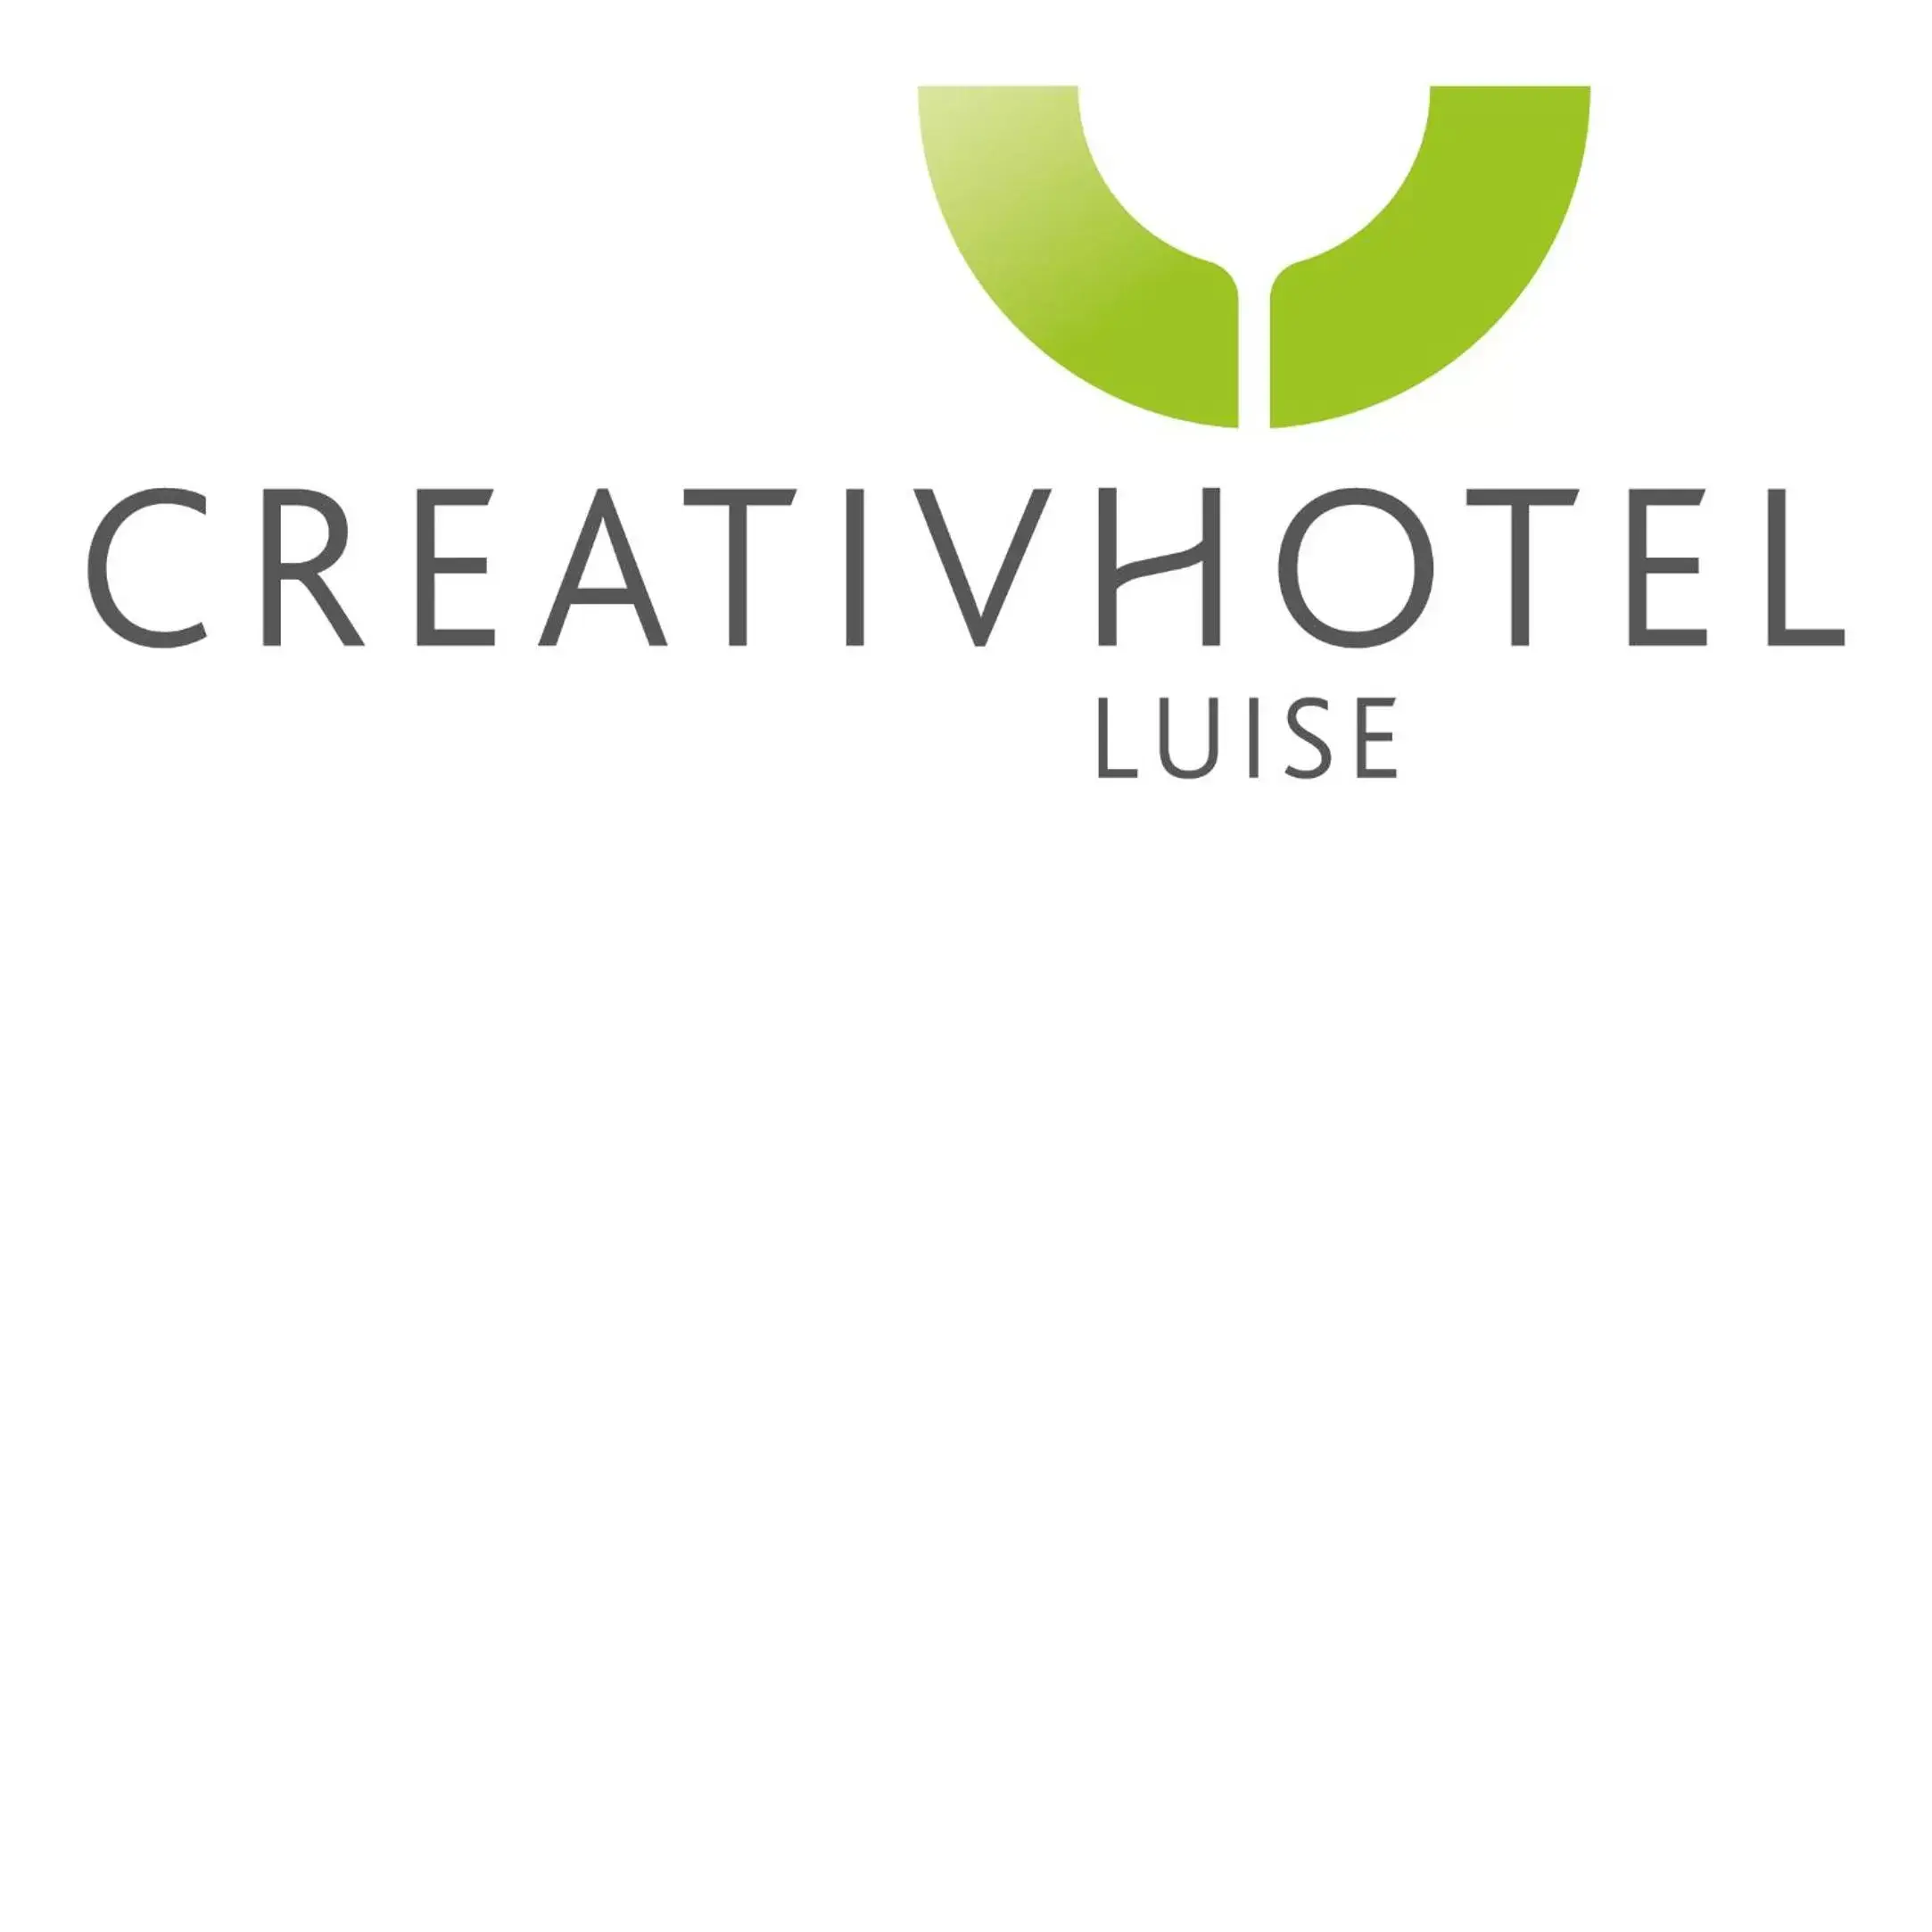 Property logo or sign, Property Logo/Sign in Creativhotel Luise